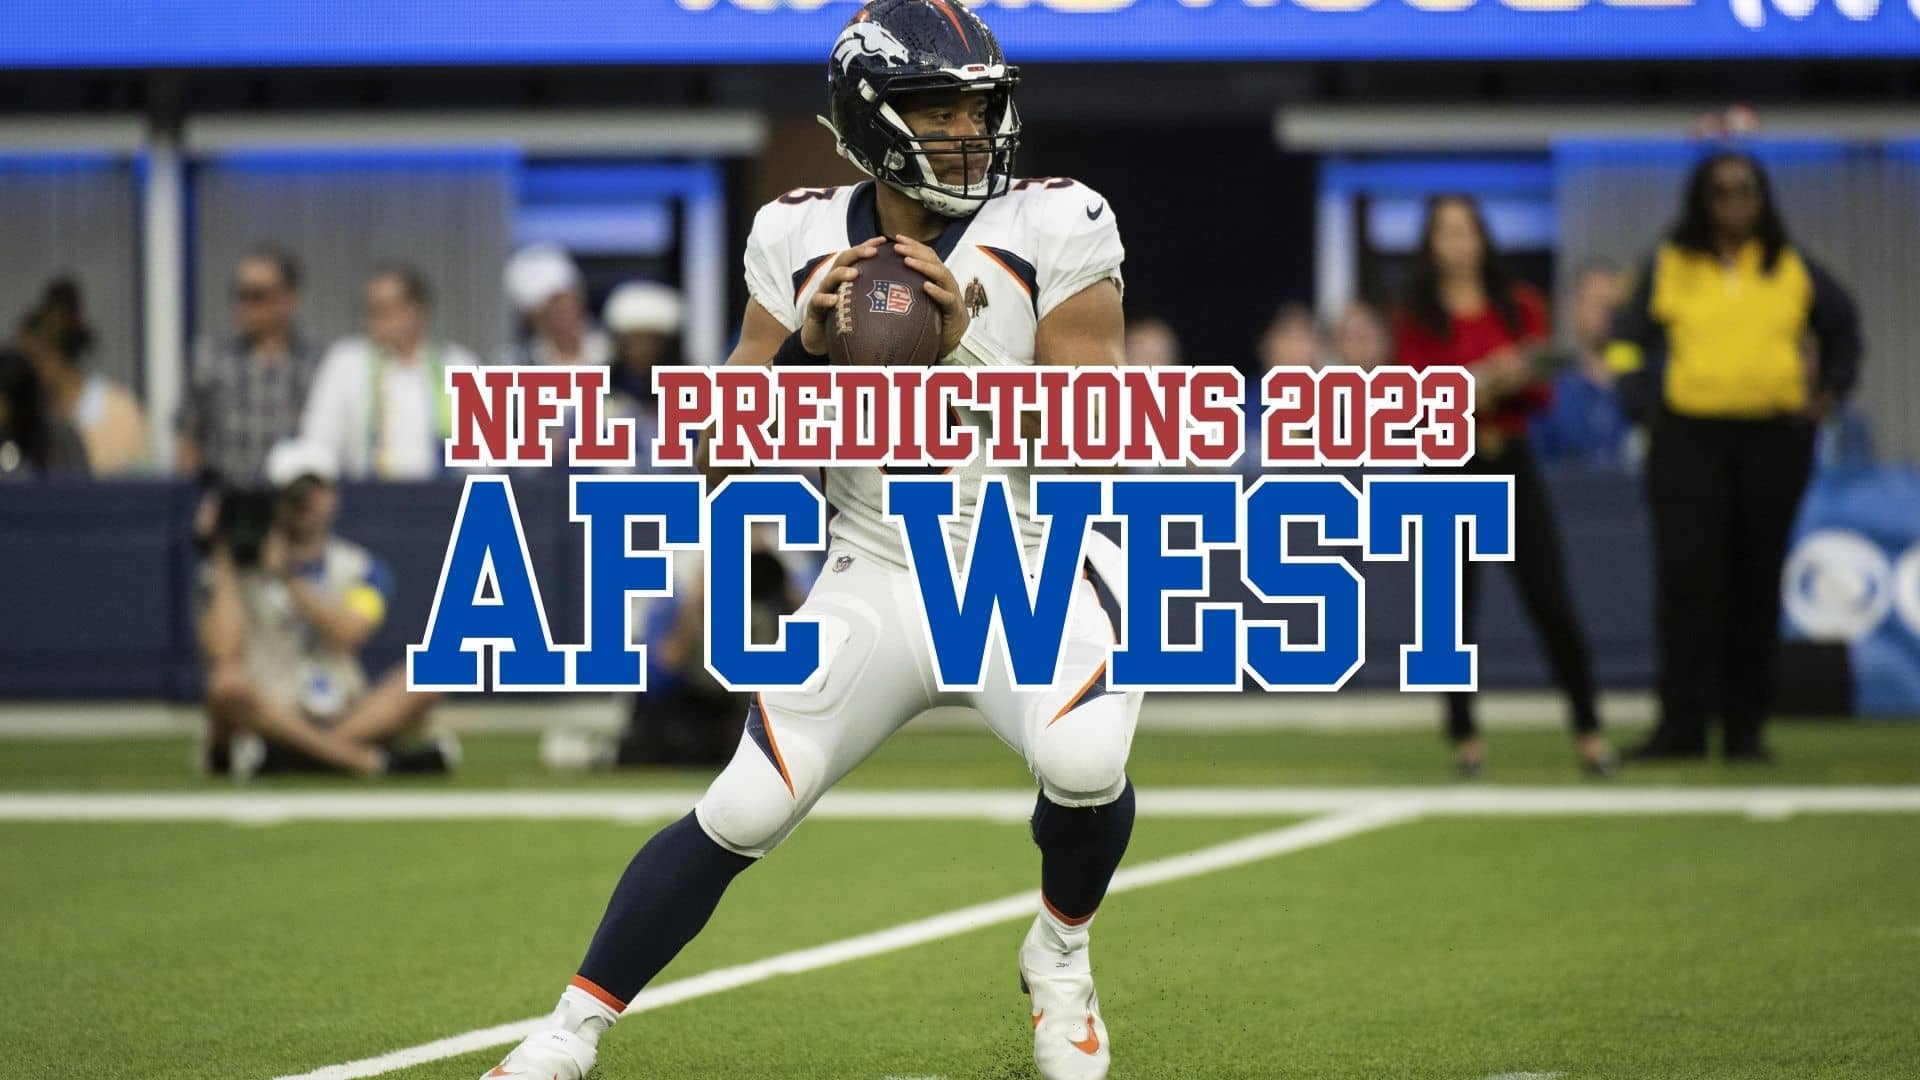 predictions on tonight's nfl game